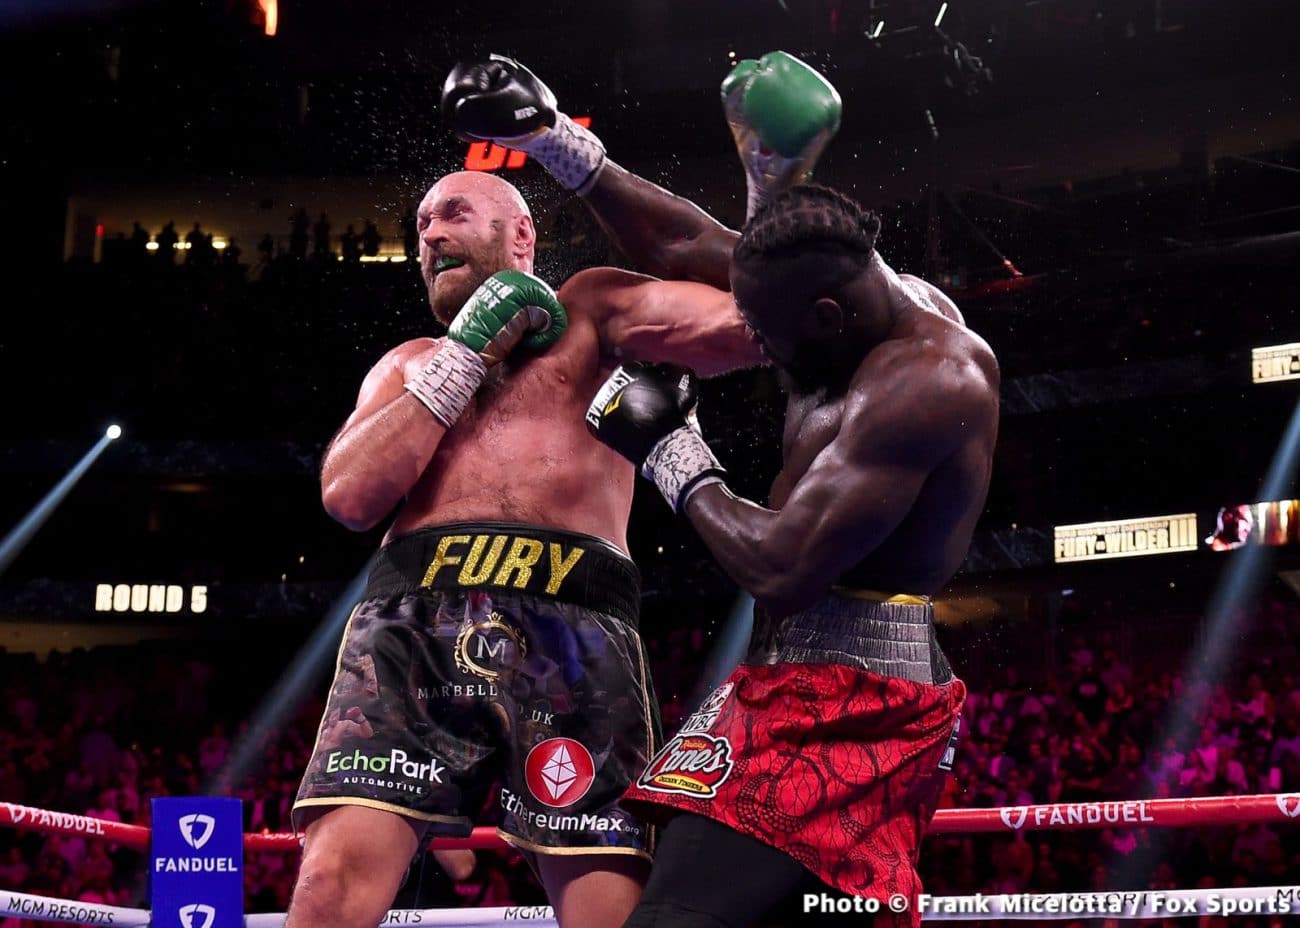 Image: Tyson Fury could face Charr or Helenius next if Whyte fight doesn't happen